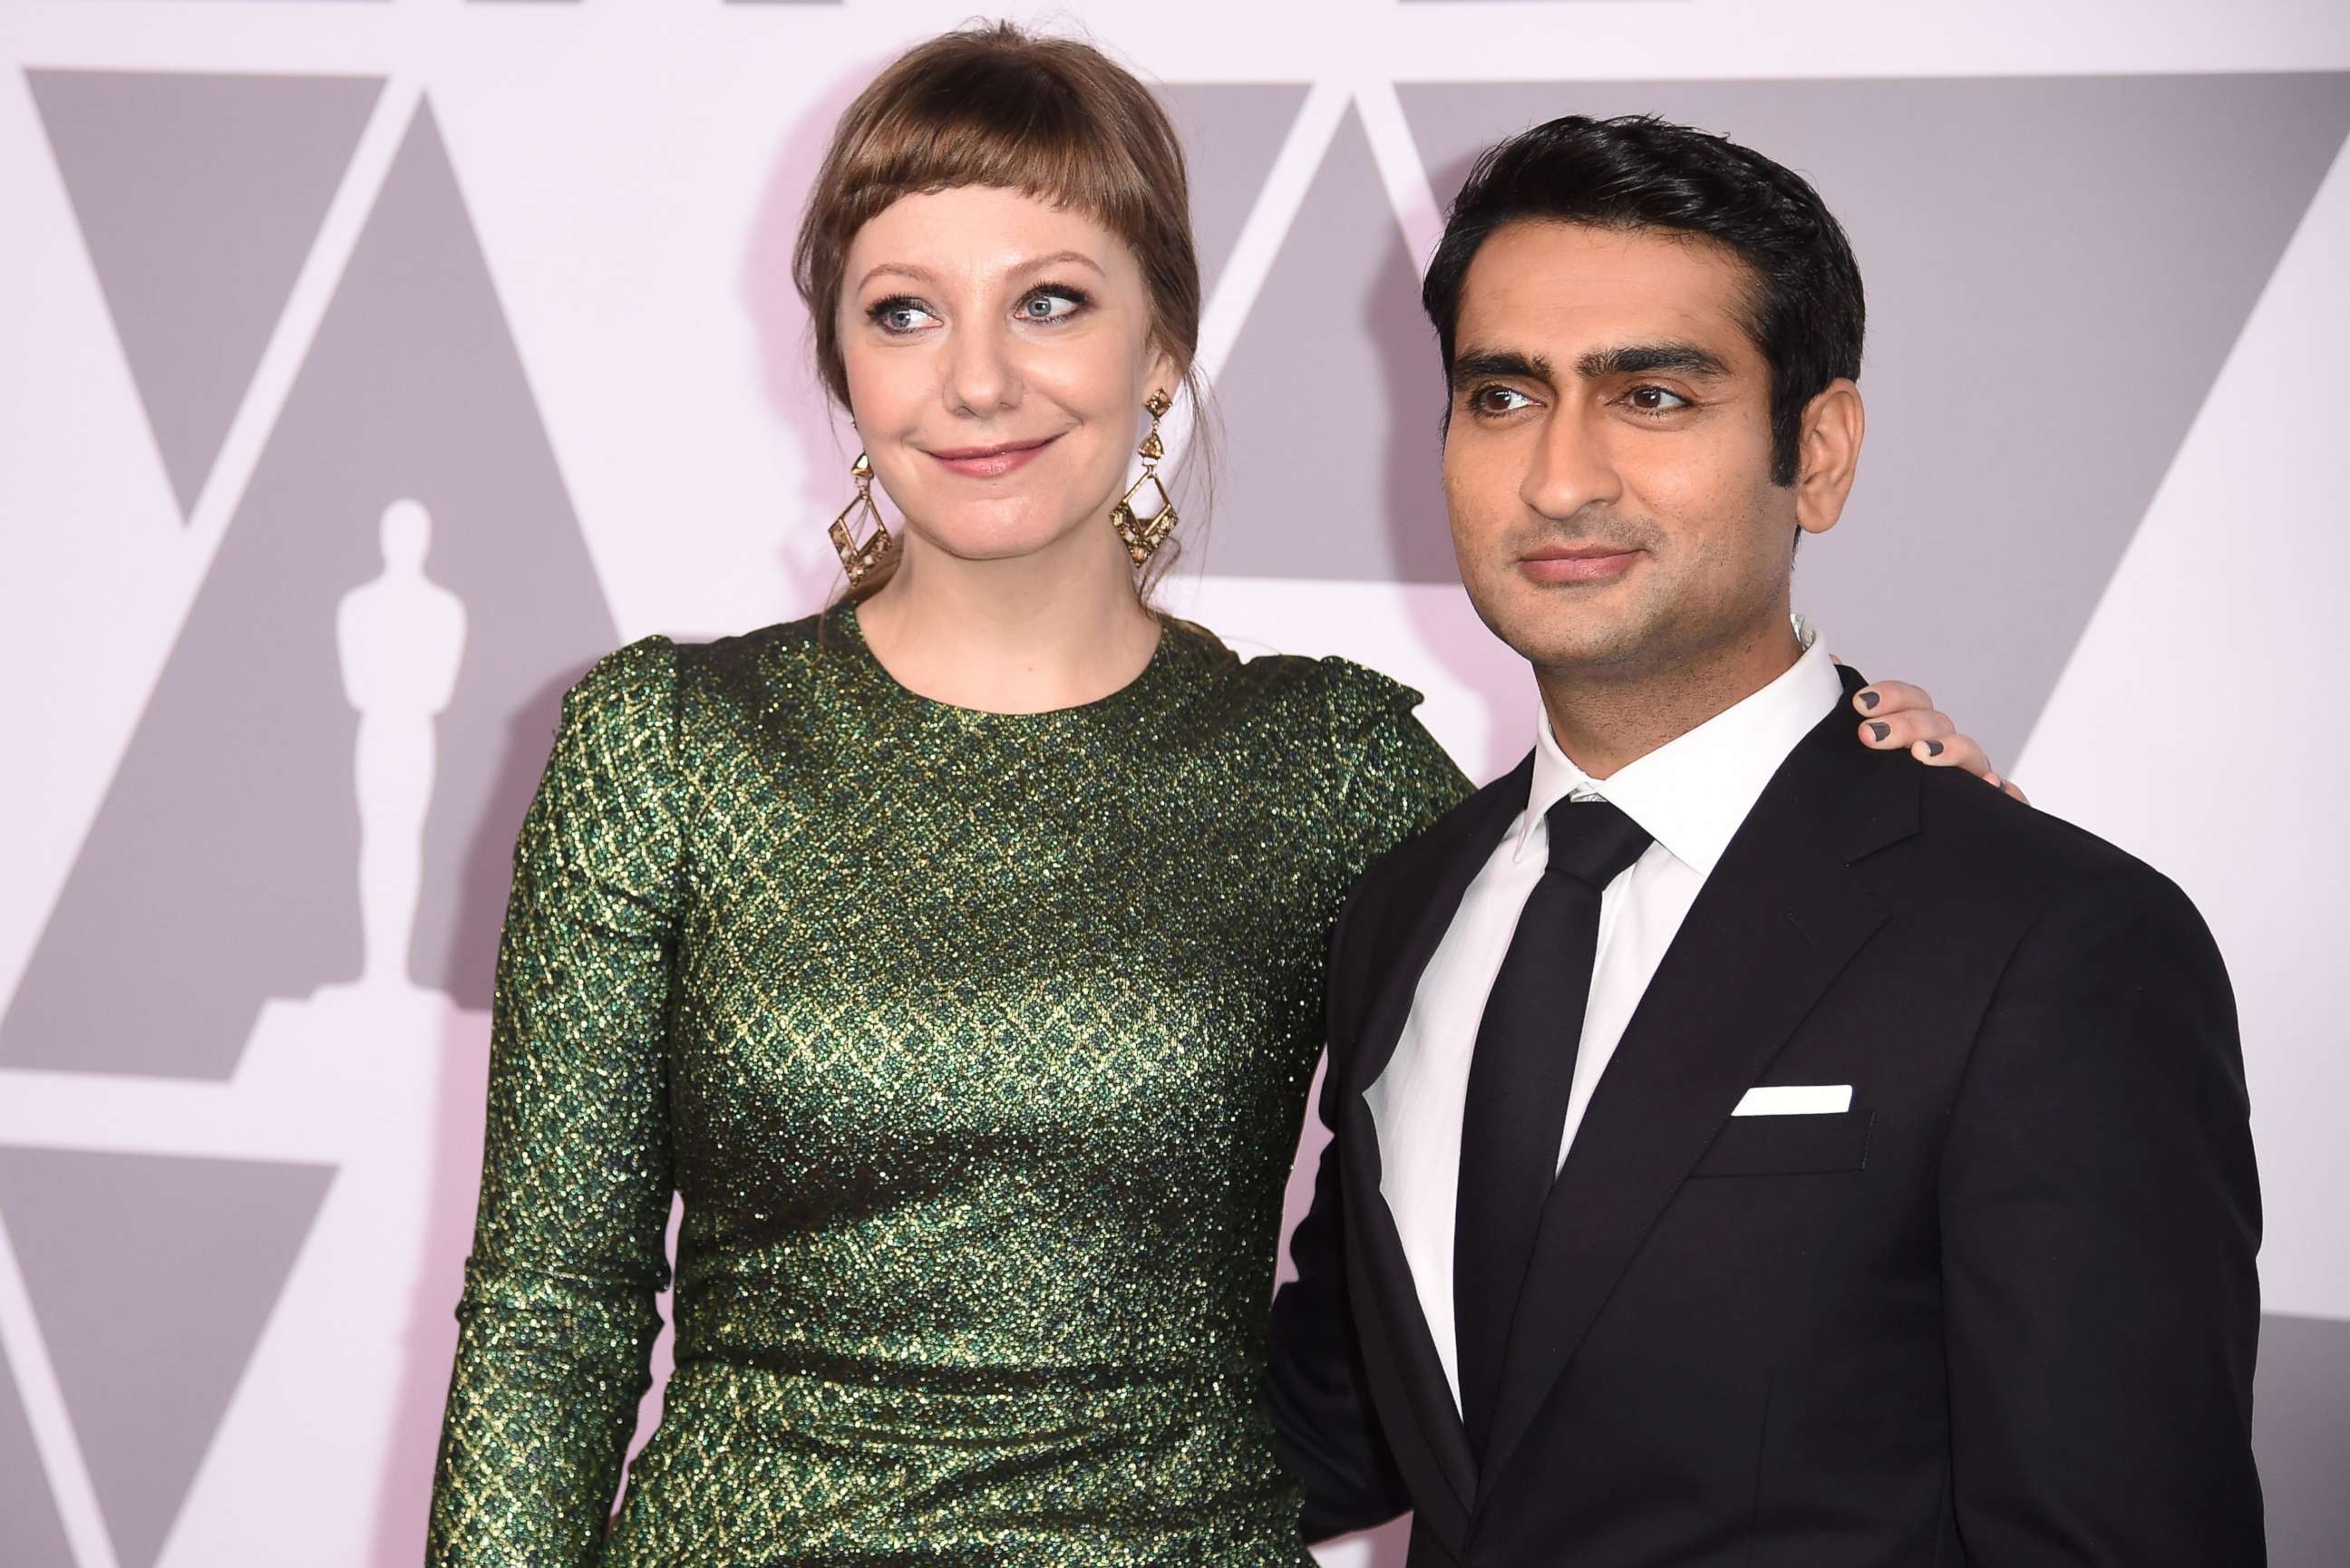 PHOTO: Emily V. Gordon (L) and Kumail Nanjiani, nominated for original screenplay for "The Big Sick," arrive for the Annual Academy Awards Nominee Luncheon at the Beverly Hilton Hotel in Beverly Hills, Calif., Feb. 5, 2018.